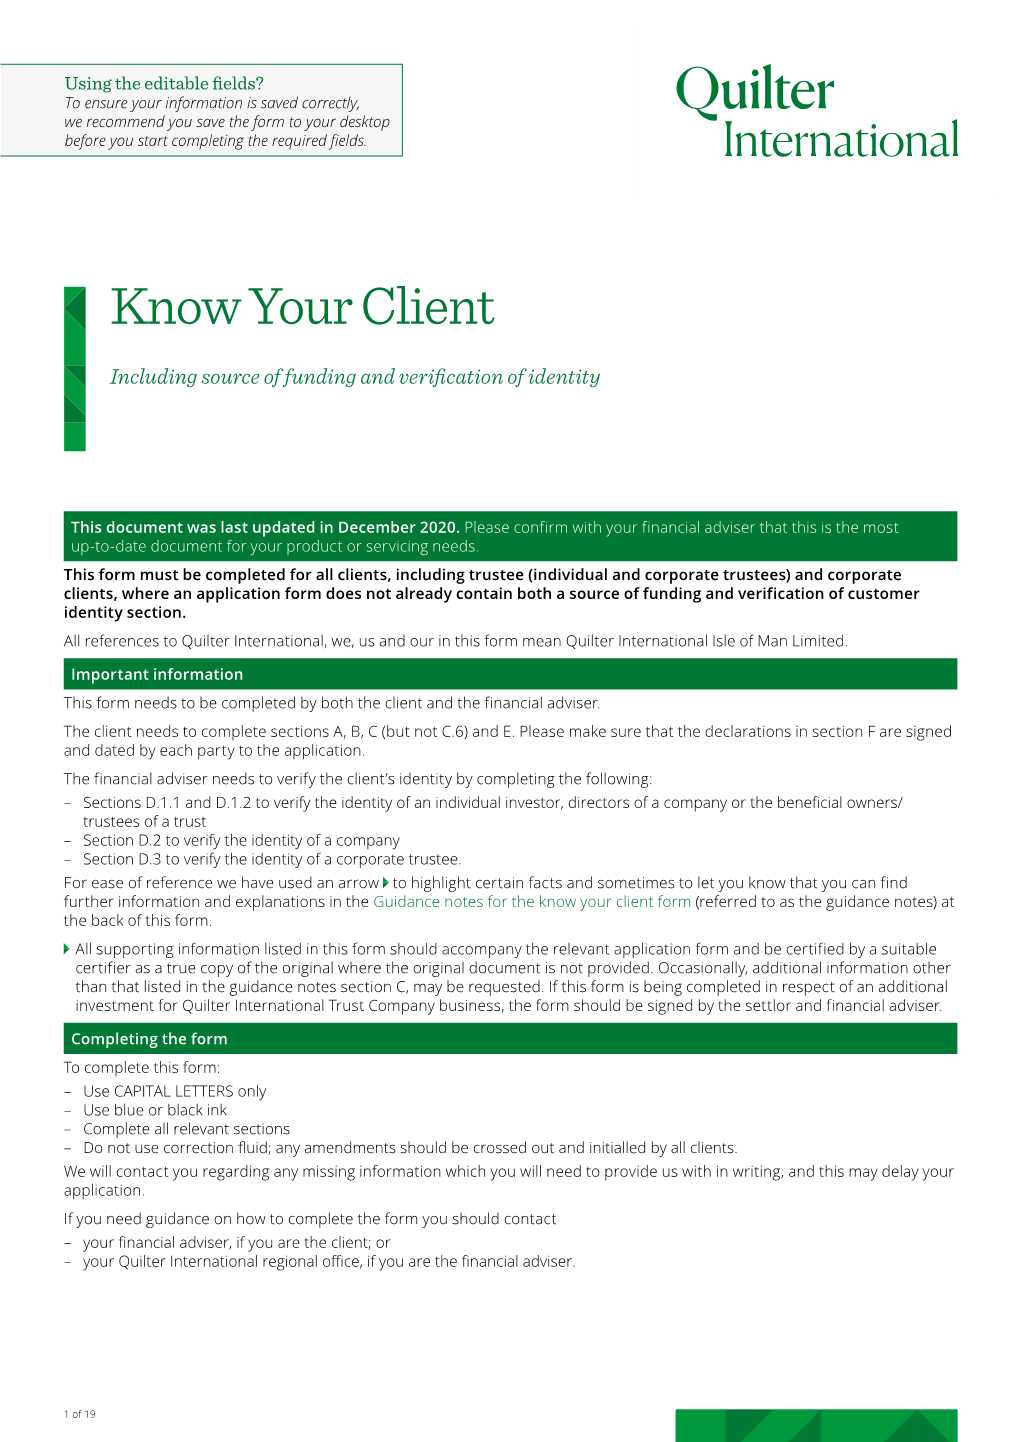 Know Your Client